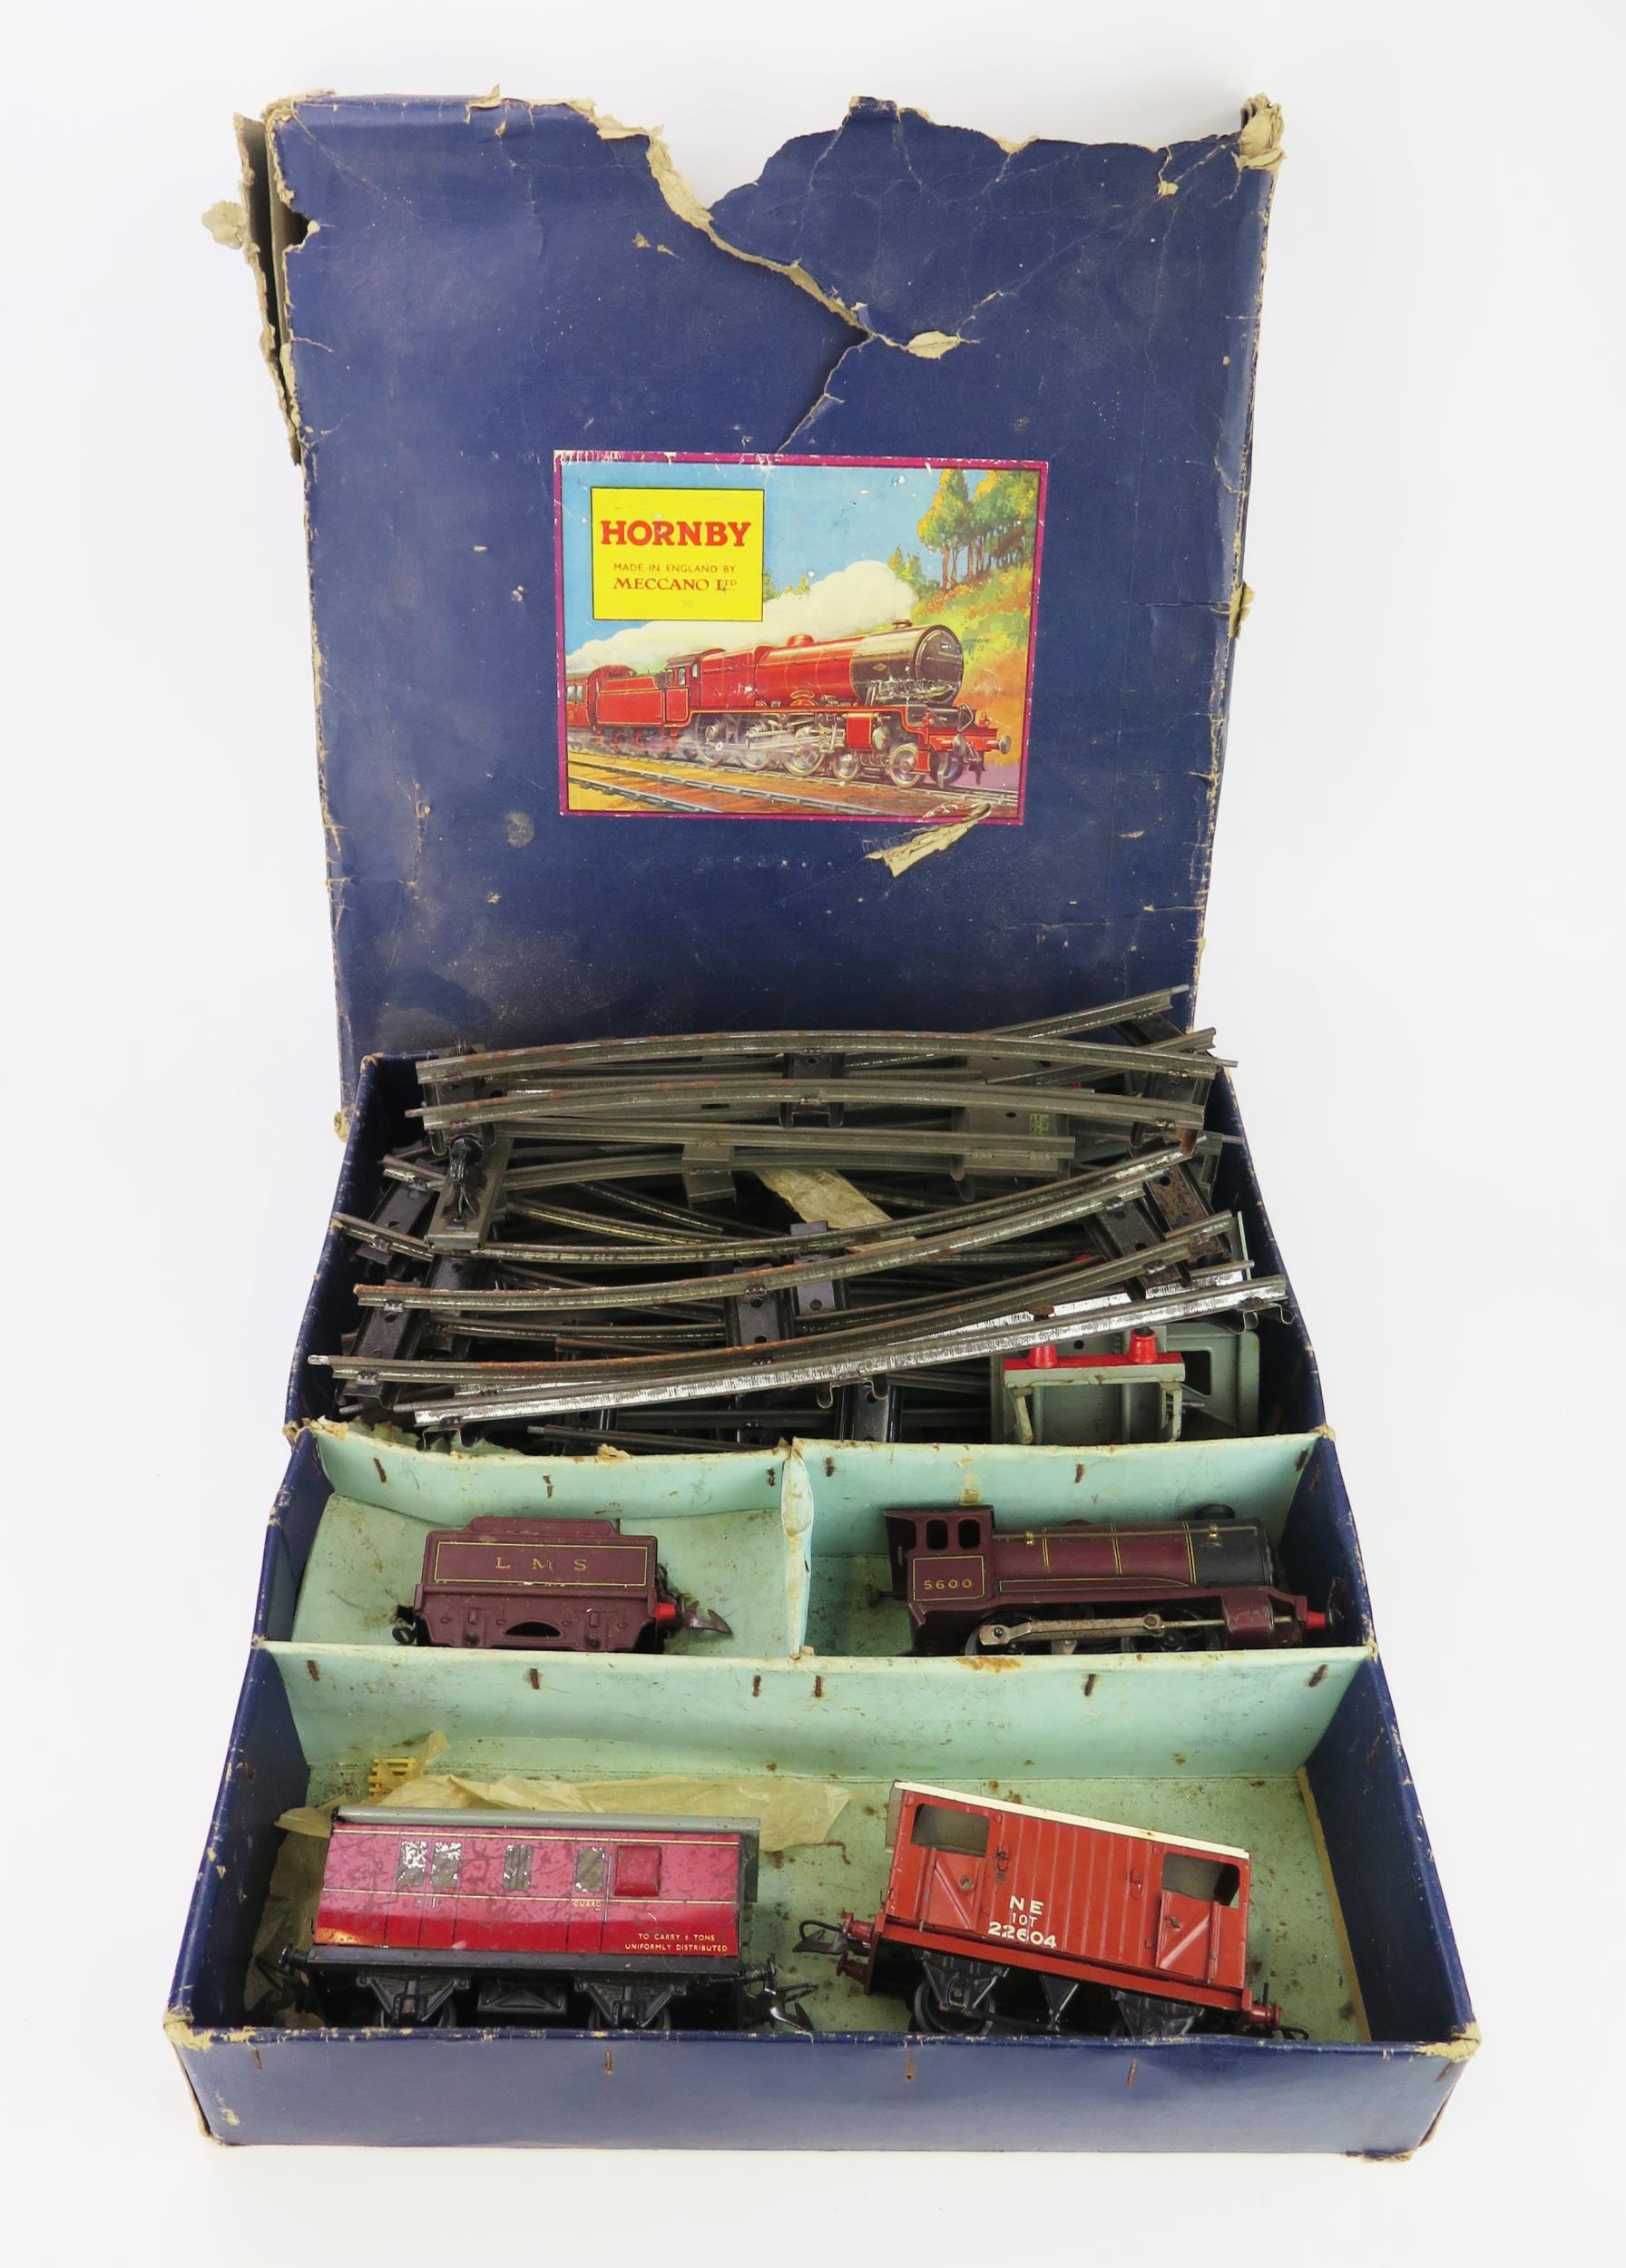 Hornby O Gauge No. 6 Goods Train Set with Type 501 Maroon LMS Loco & Tender (extra track) - good but